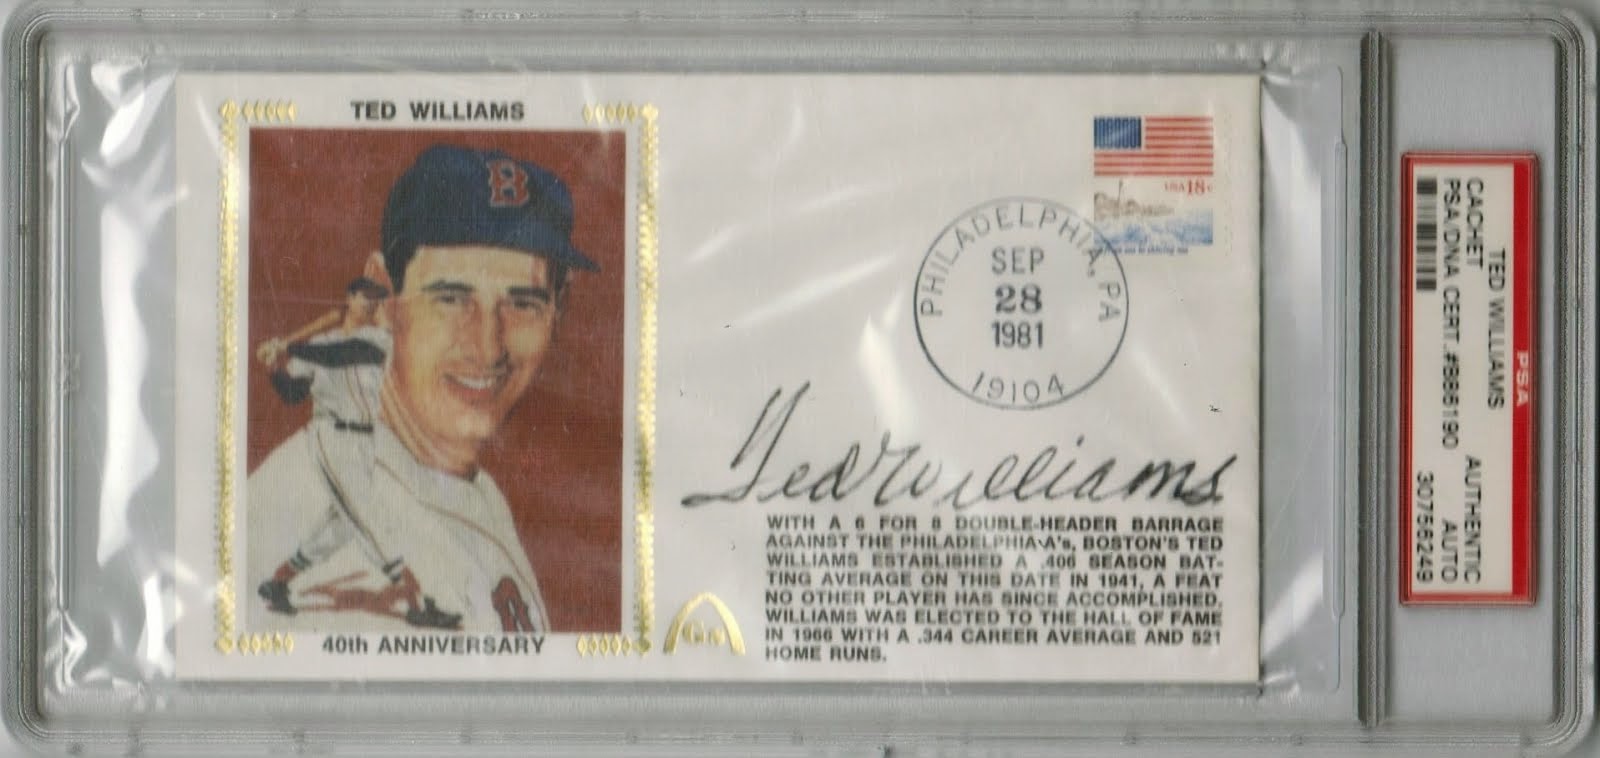 Ted Williams signed cachet